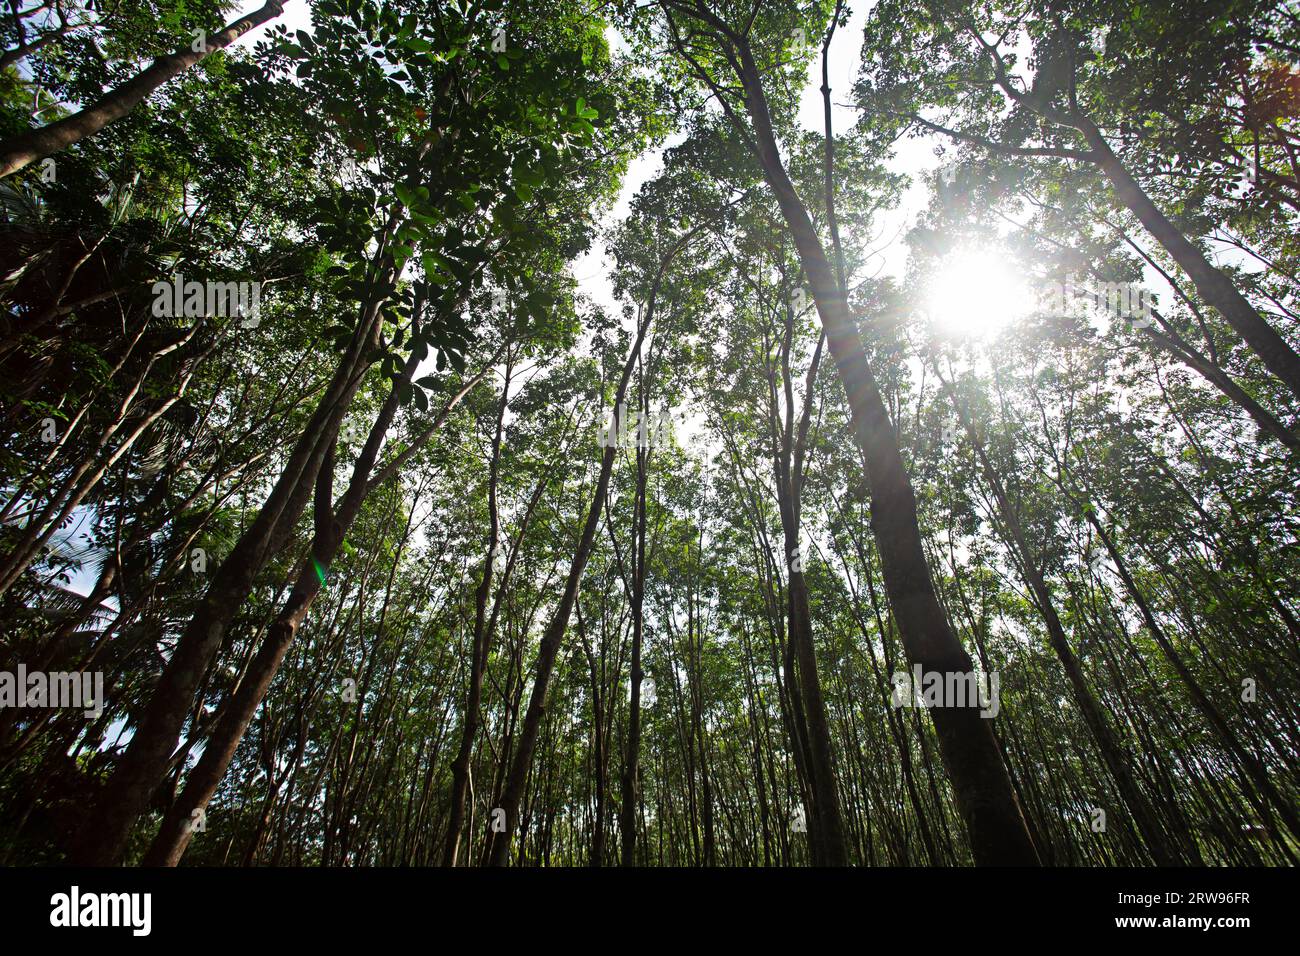 Gaze up at the beautiful rubber trees and deciduous forests. Stock Photo